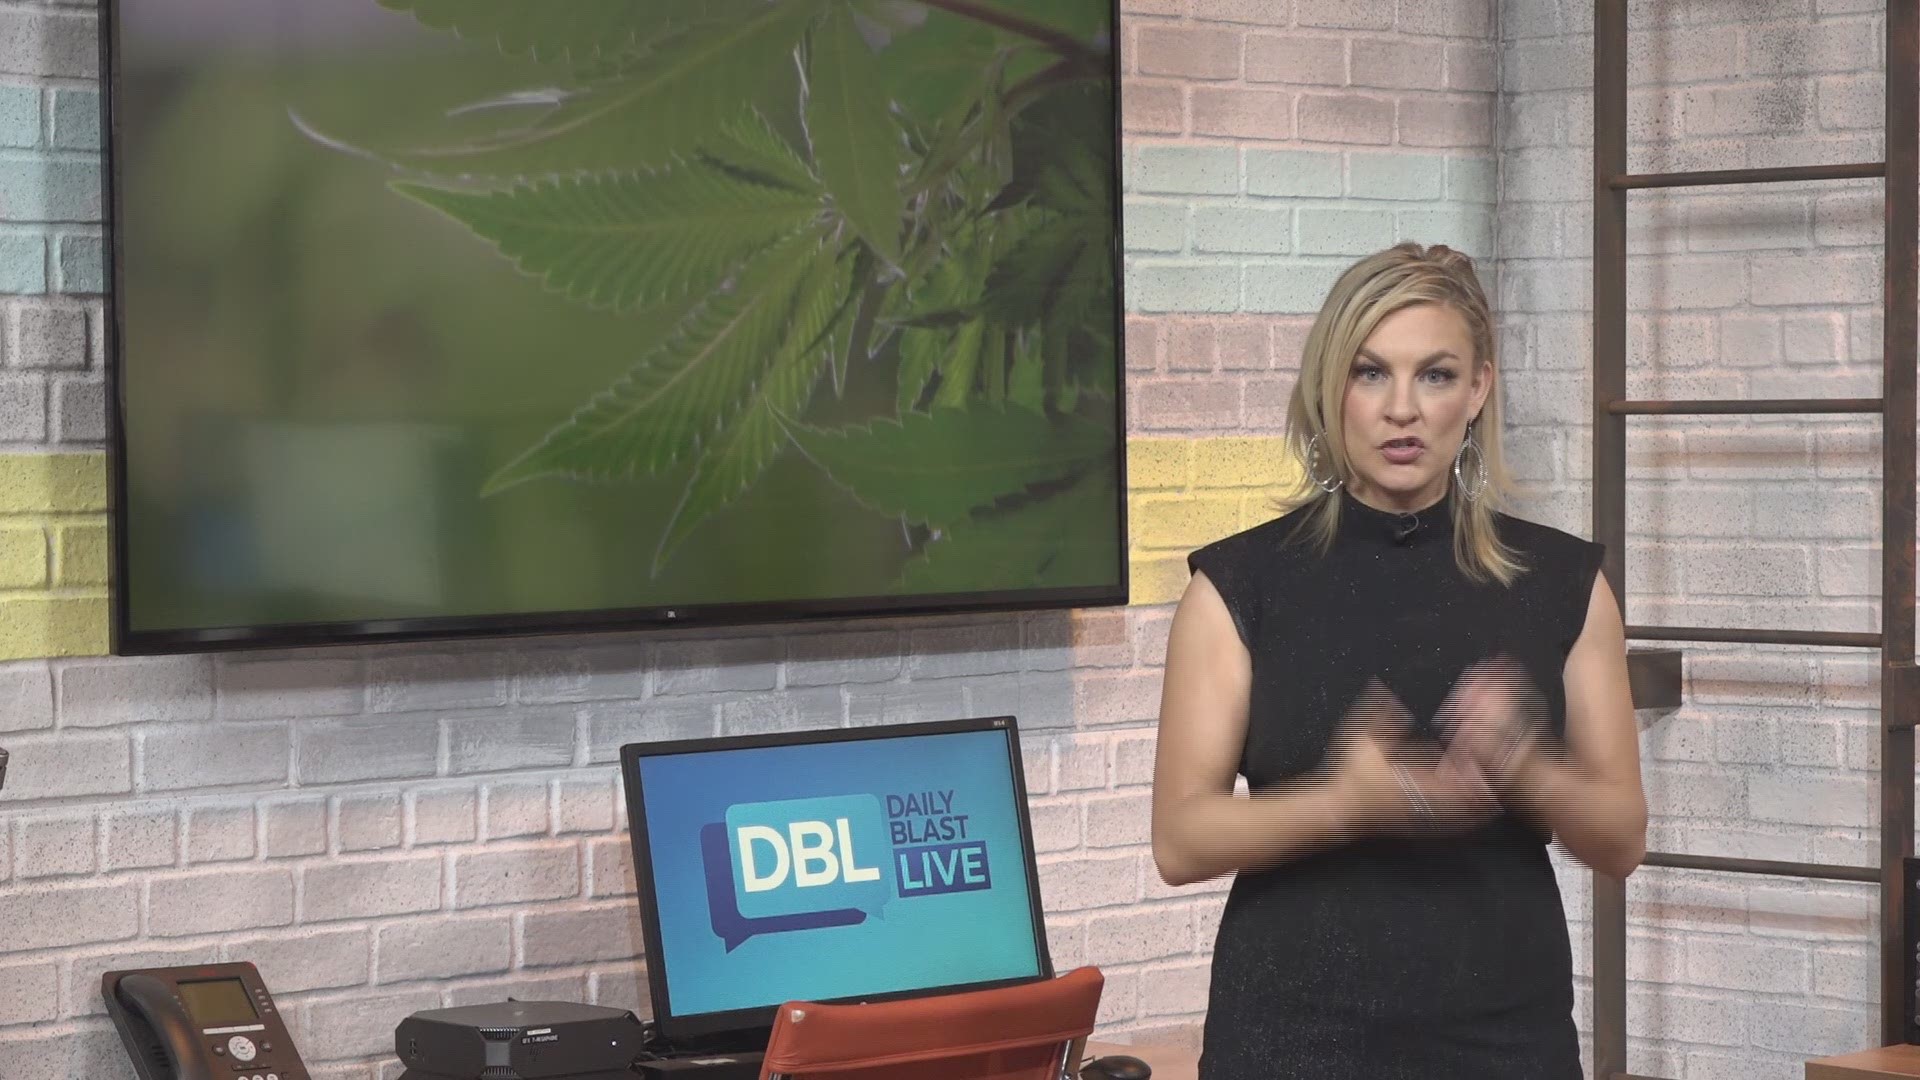 Marijuana is legalized in nine states in the U.S. and the majority of Americans think marijuana should be legal. As we approach the possibility of a federal decriminalization of marijuana, Daily Blast LIVE wonders: What side of the green line do you stand